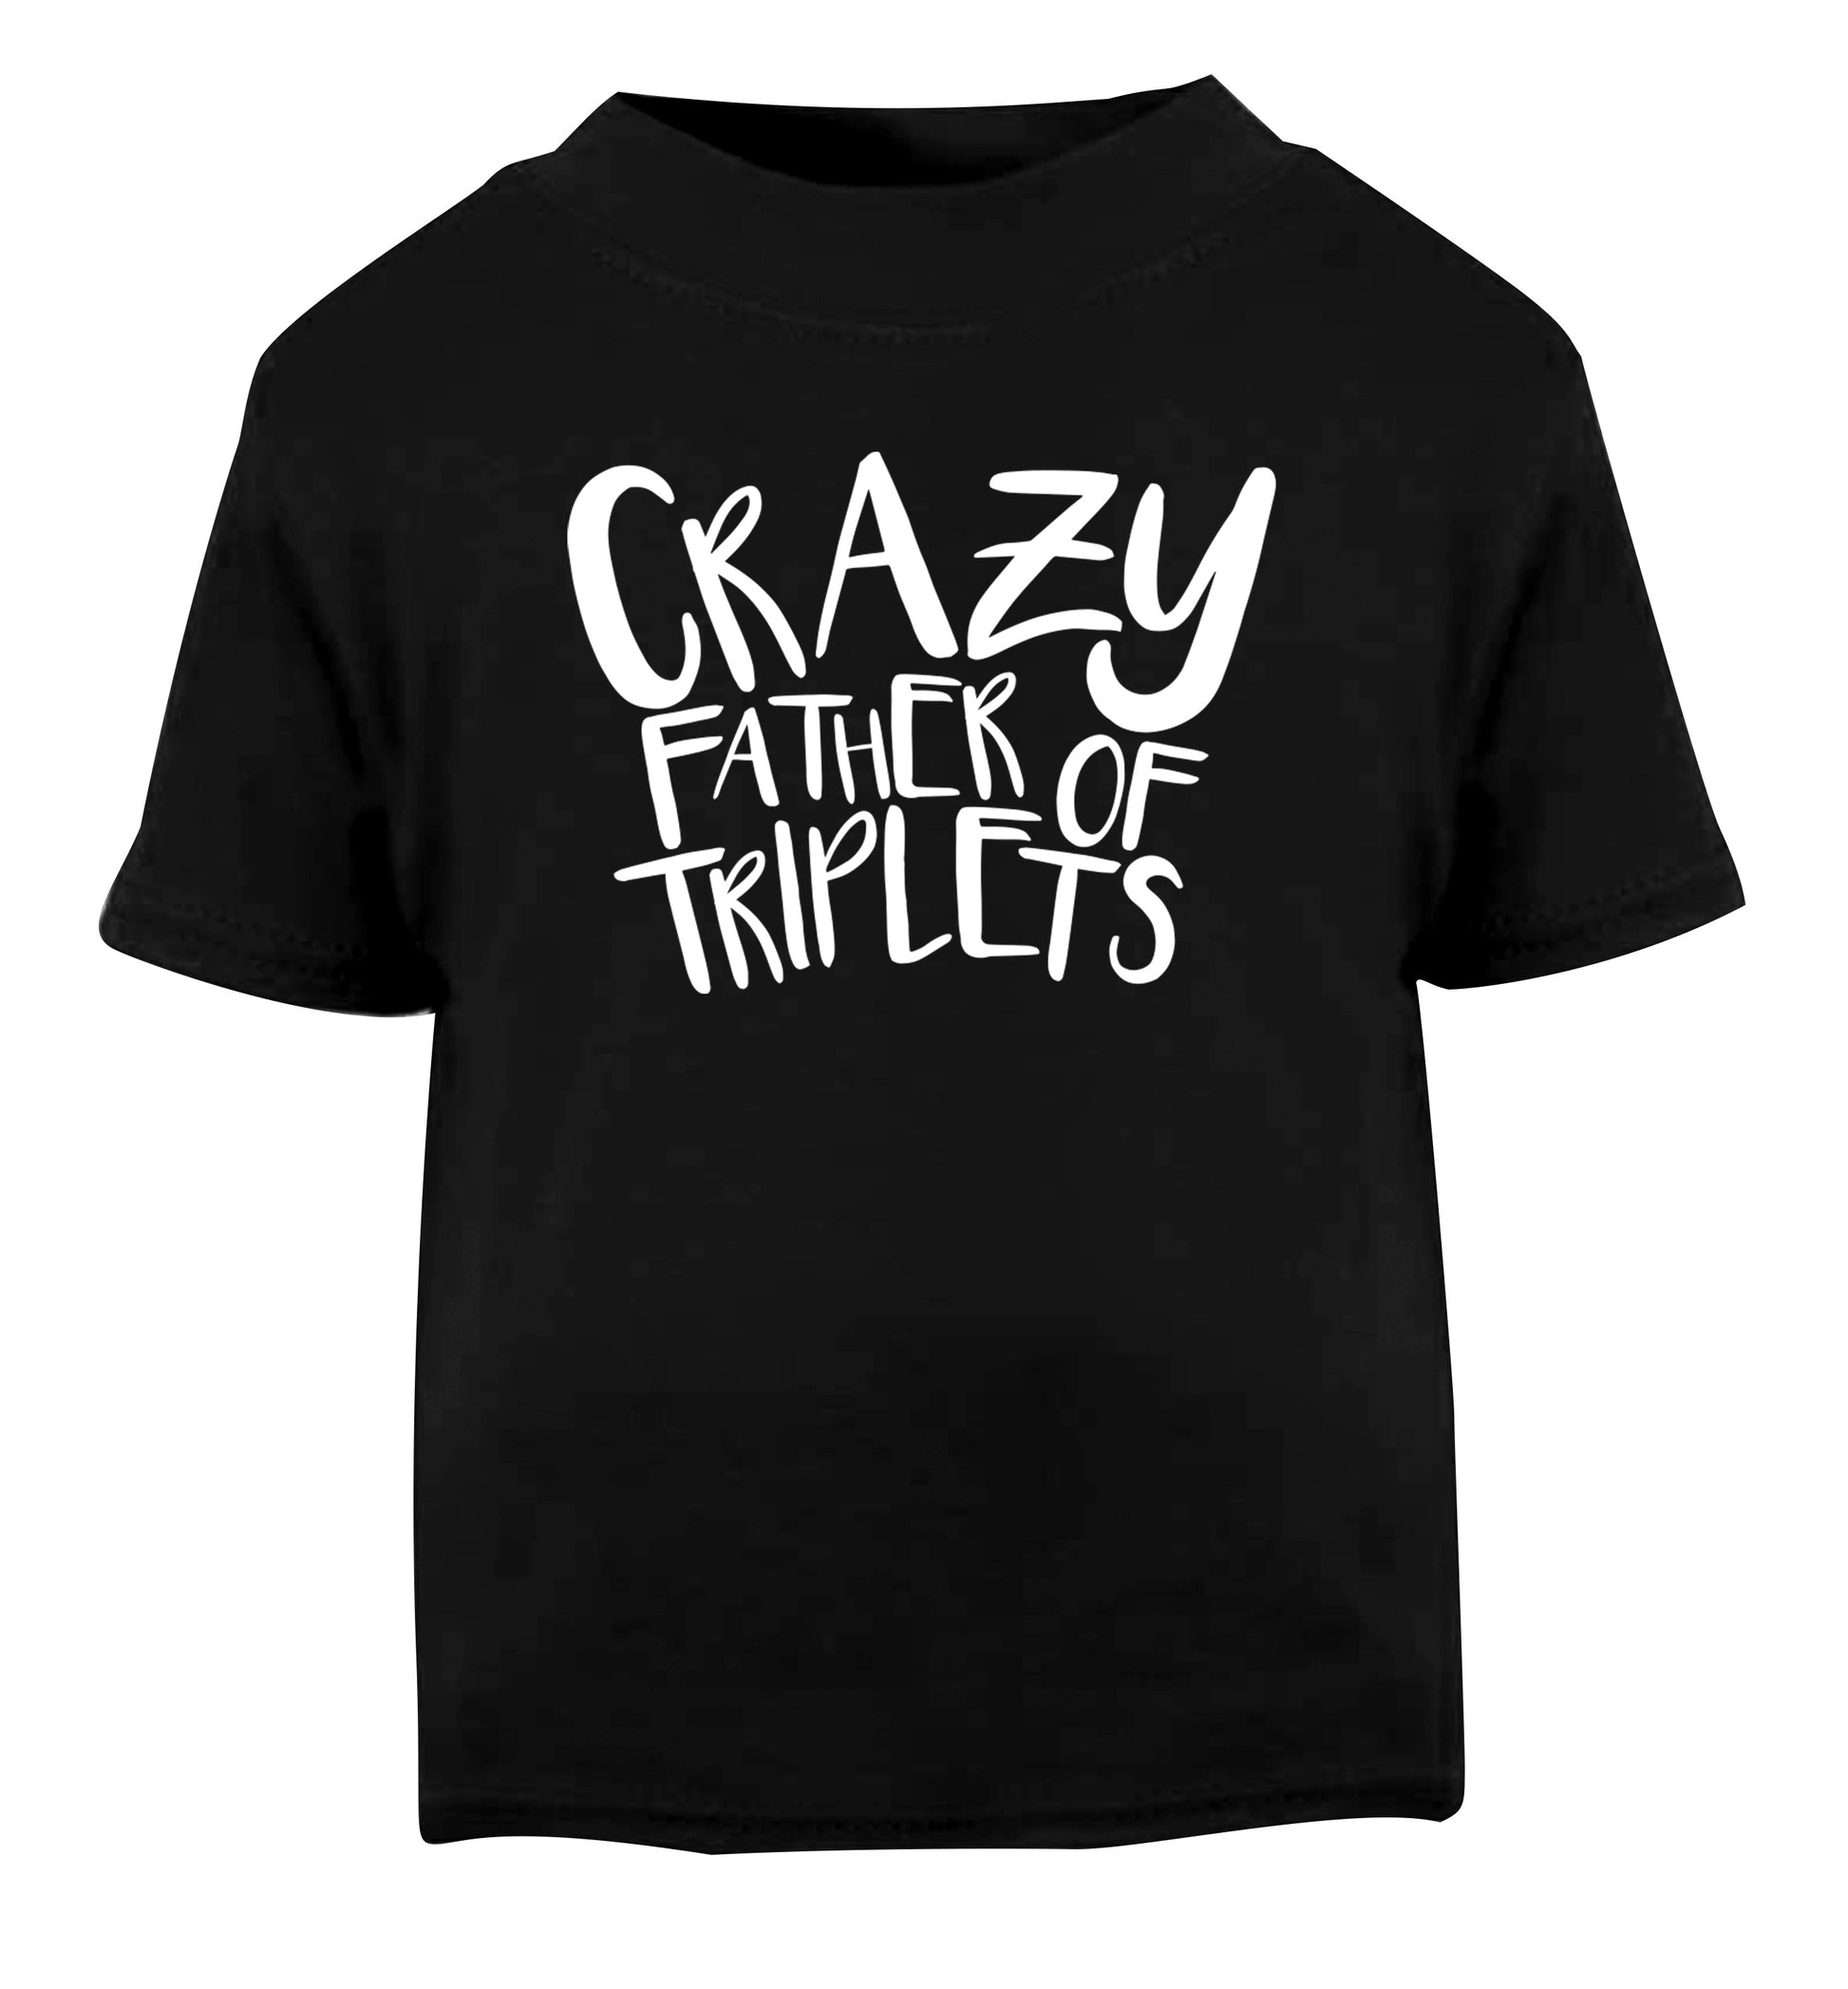 Crazy father of triplets Black Baby Toddler Tshirt 2 years